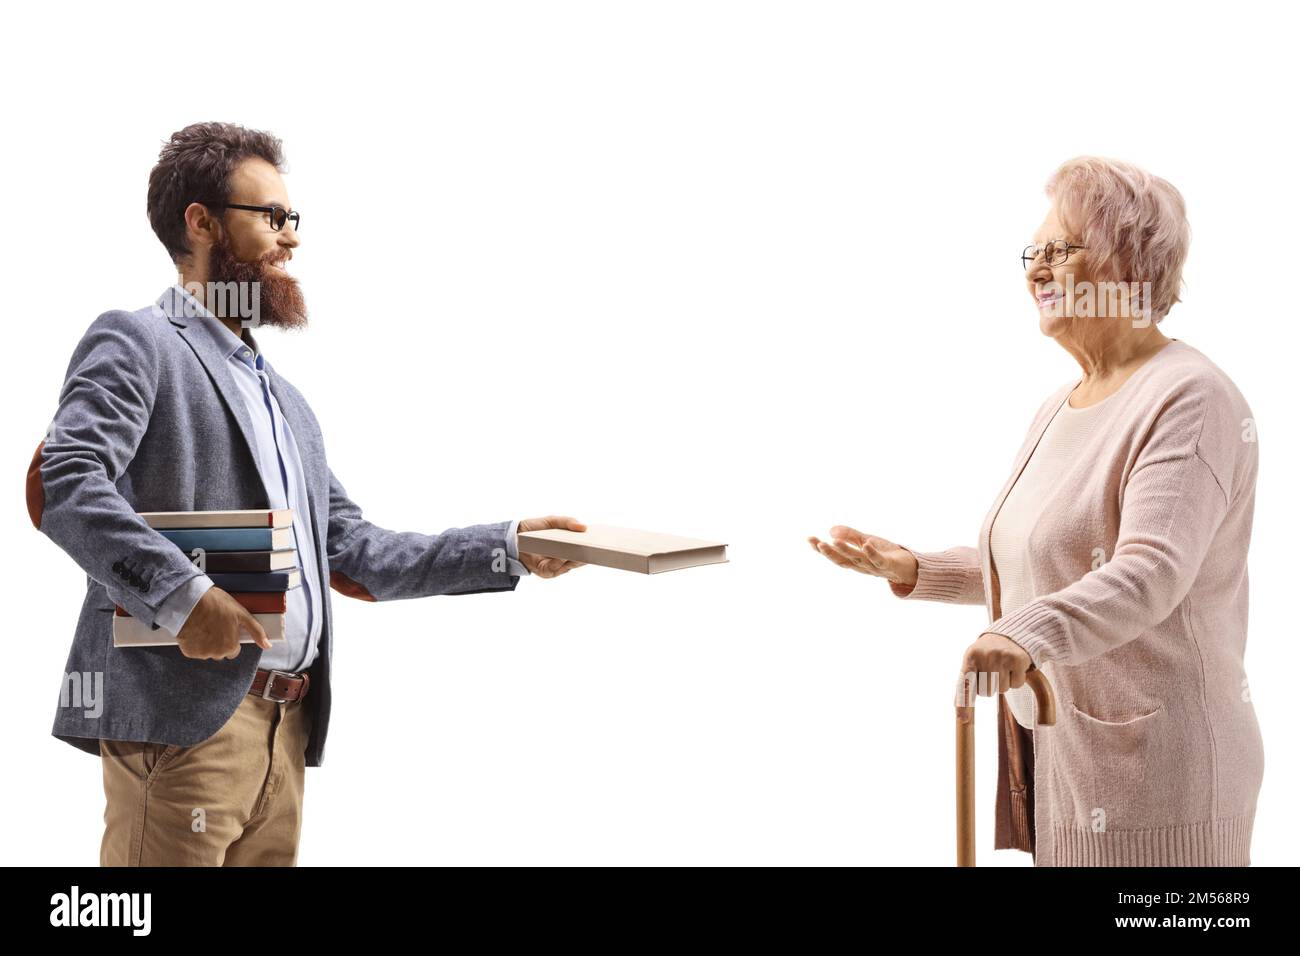 Profile shot of a man giving a book to an elderly woman isolated on white background Stock Photo